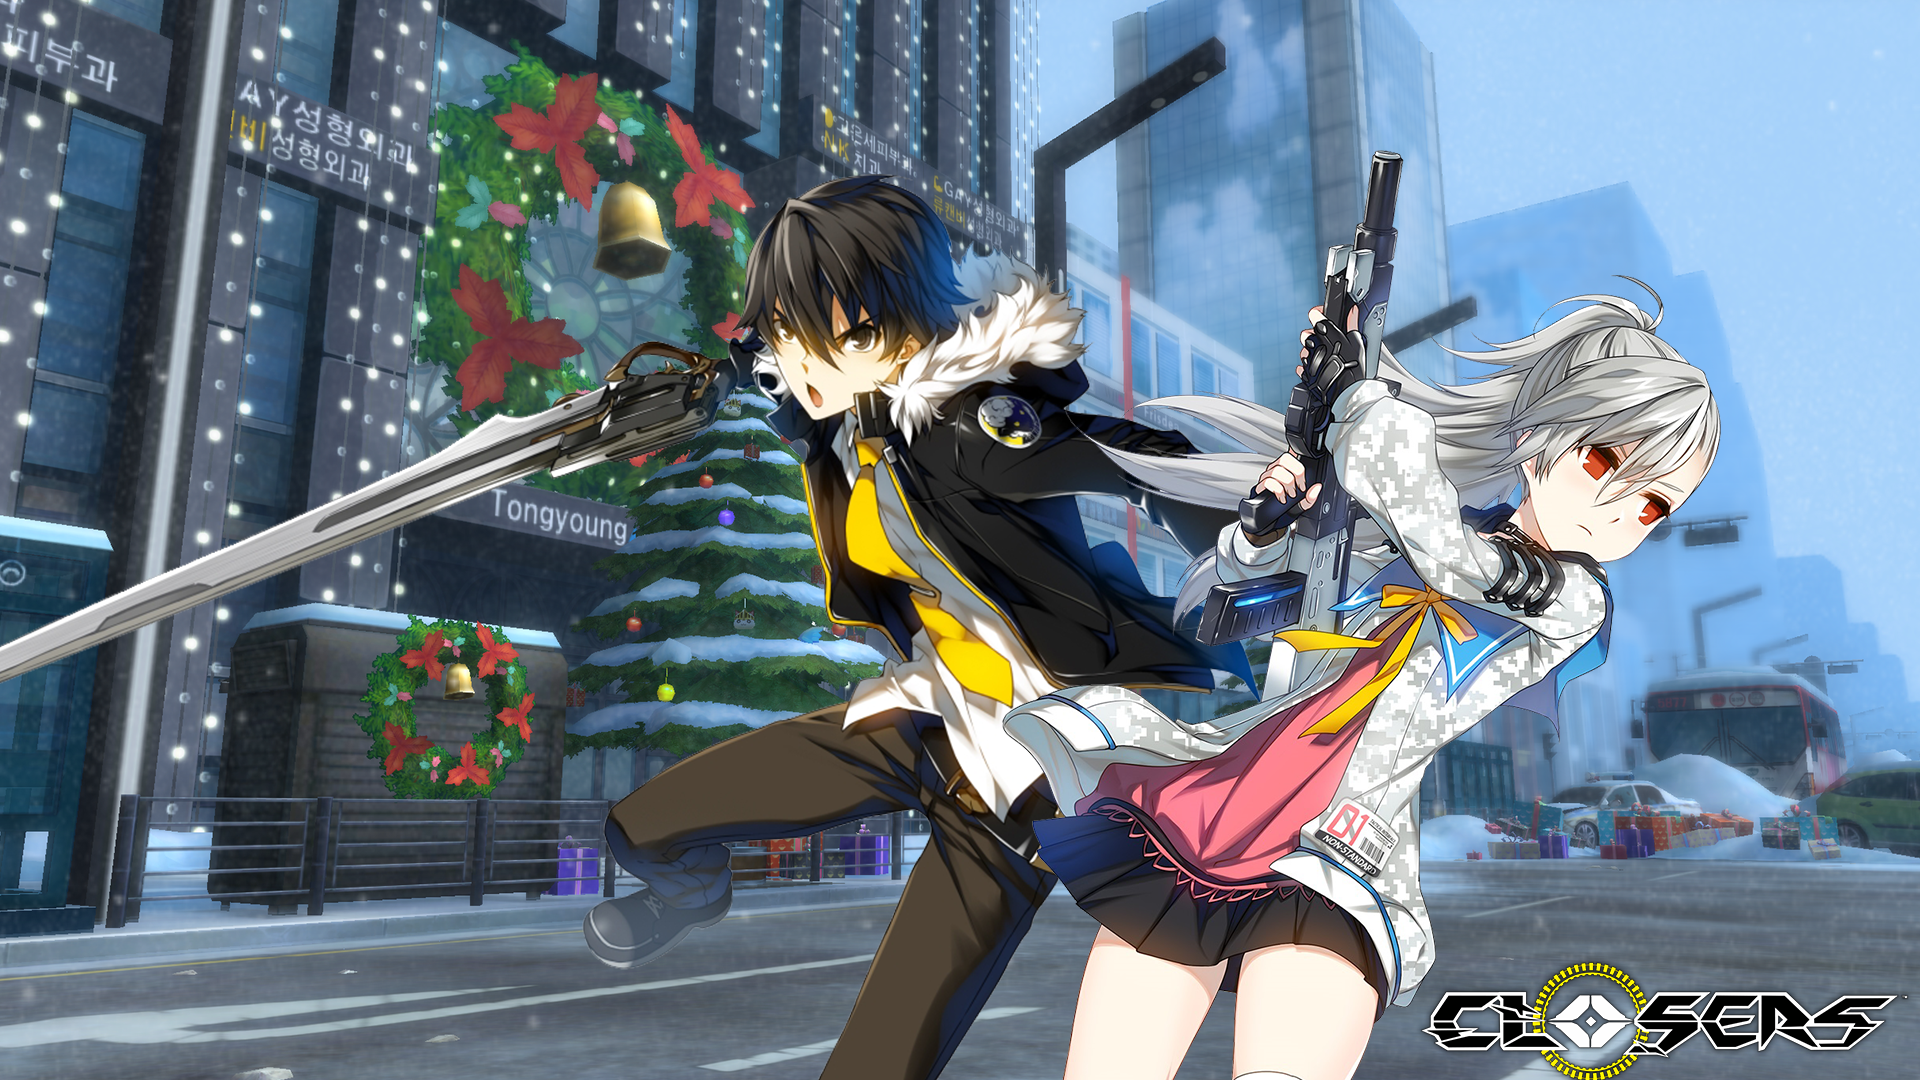 Free Download Closers Online Seha And Tina Wallpaper Closers 19x1080 For Your Desktop Mobile Tablet Explore 28 Closers Wallpapers Closers Wallpapers